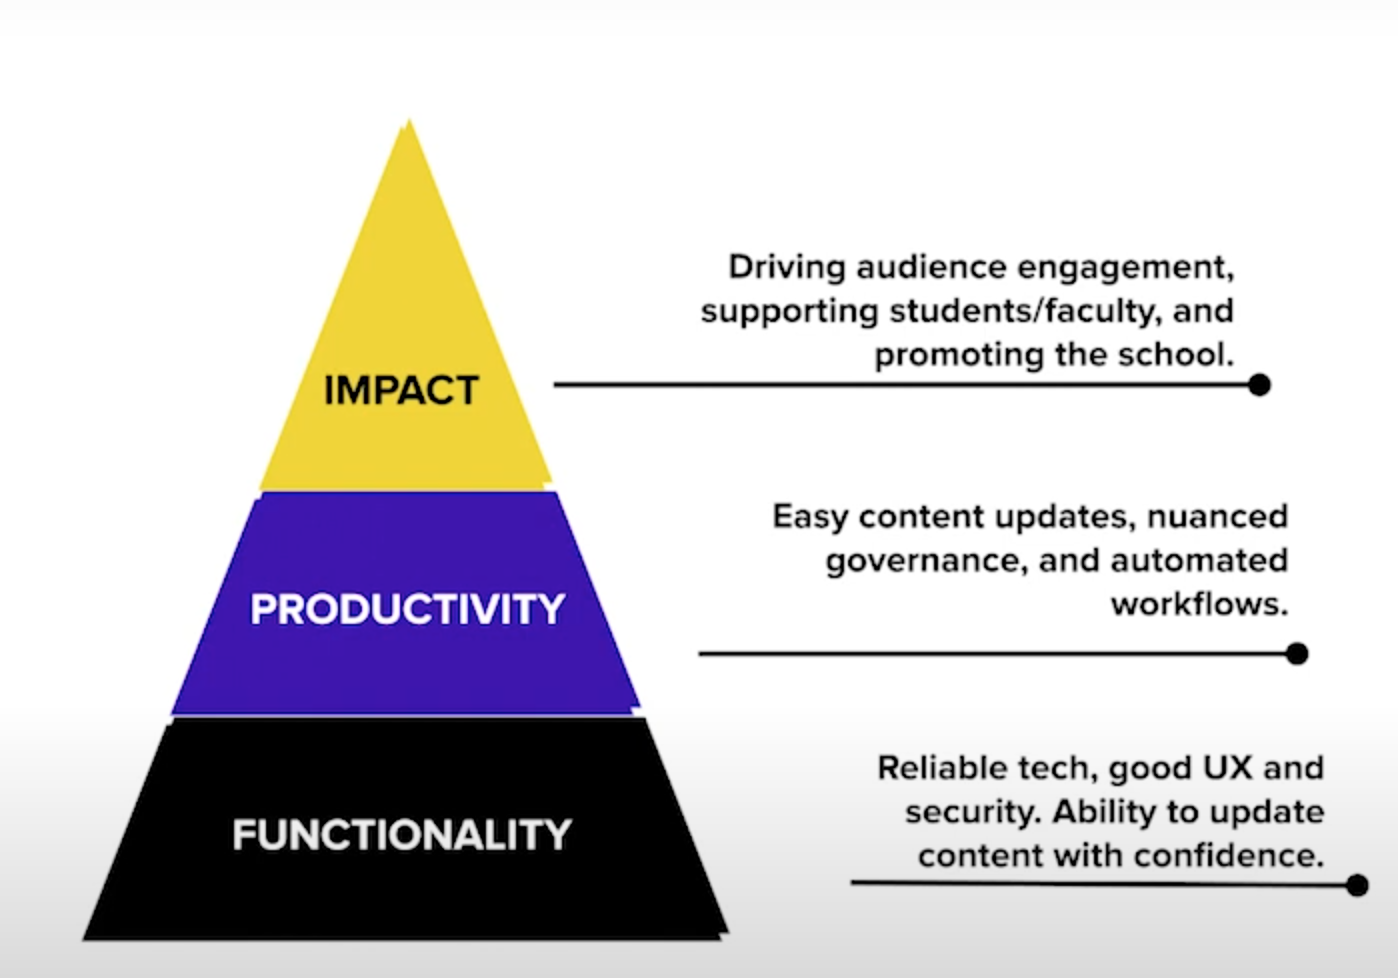 Pyramid showing functionality as the base, productivity in the middle, and impact at the top, showing that a reliable, easy-to-use website is necessary to build impact